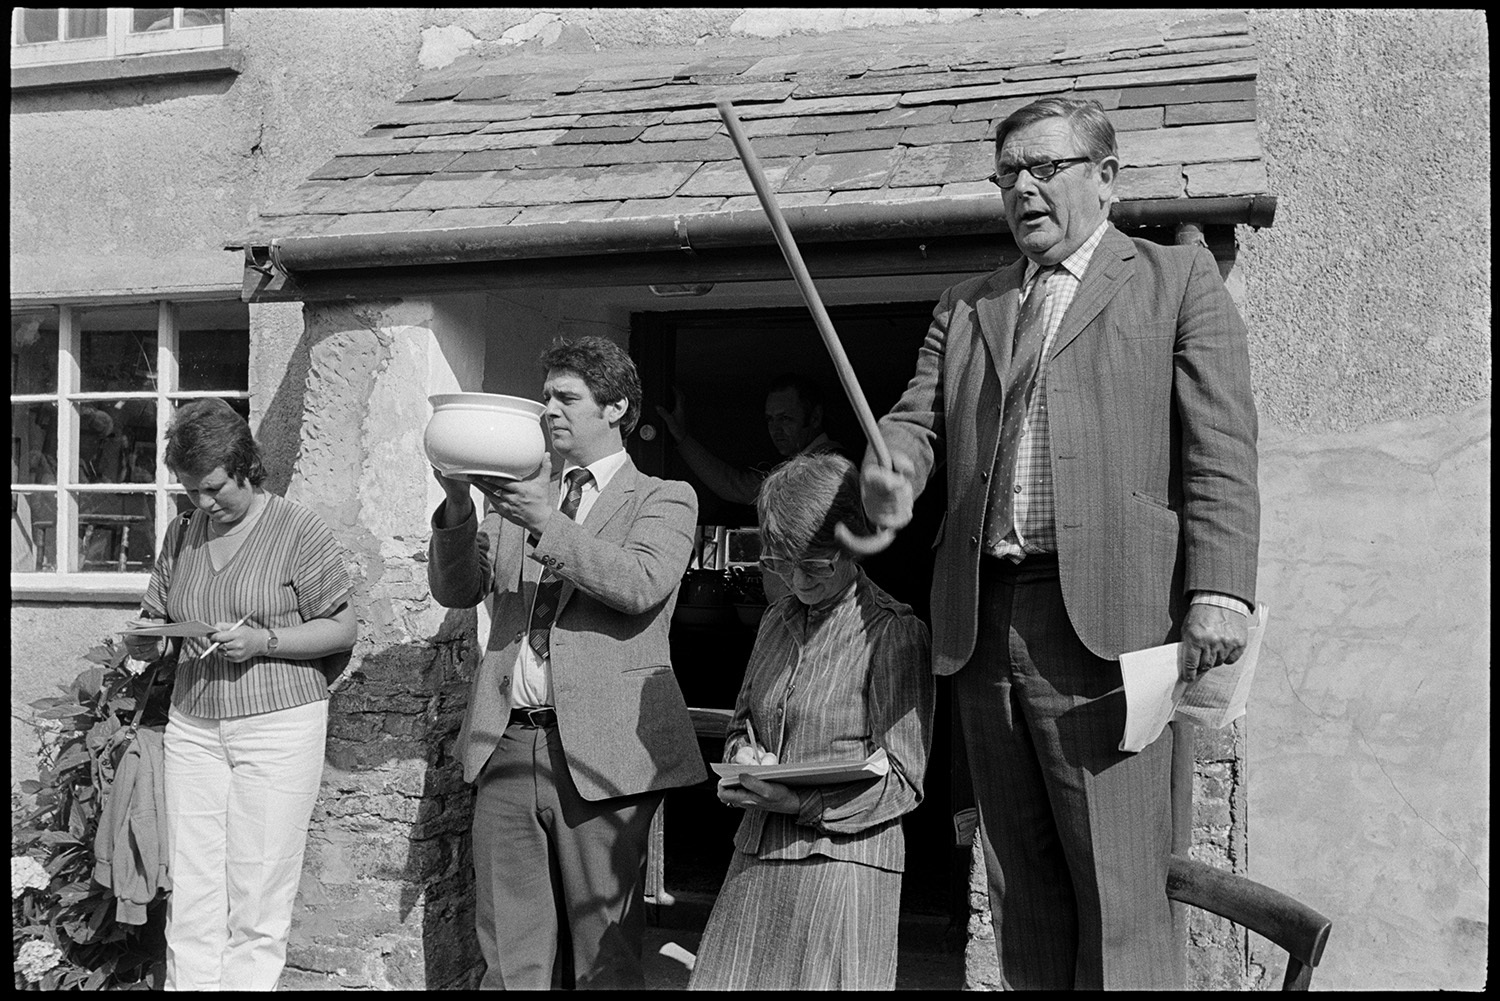 House auction, auctioneer standing on chair selling, man peering into house. Pot.
[A house auction at Roborough. Auctioneer Paul Foggo, is standing on a chair in front of the porch. He is holding up a walking stick and selling items. Diane Foggo is writing notes. Another man is holding up a chamber pot for sale.]